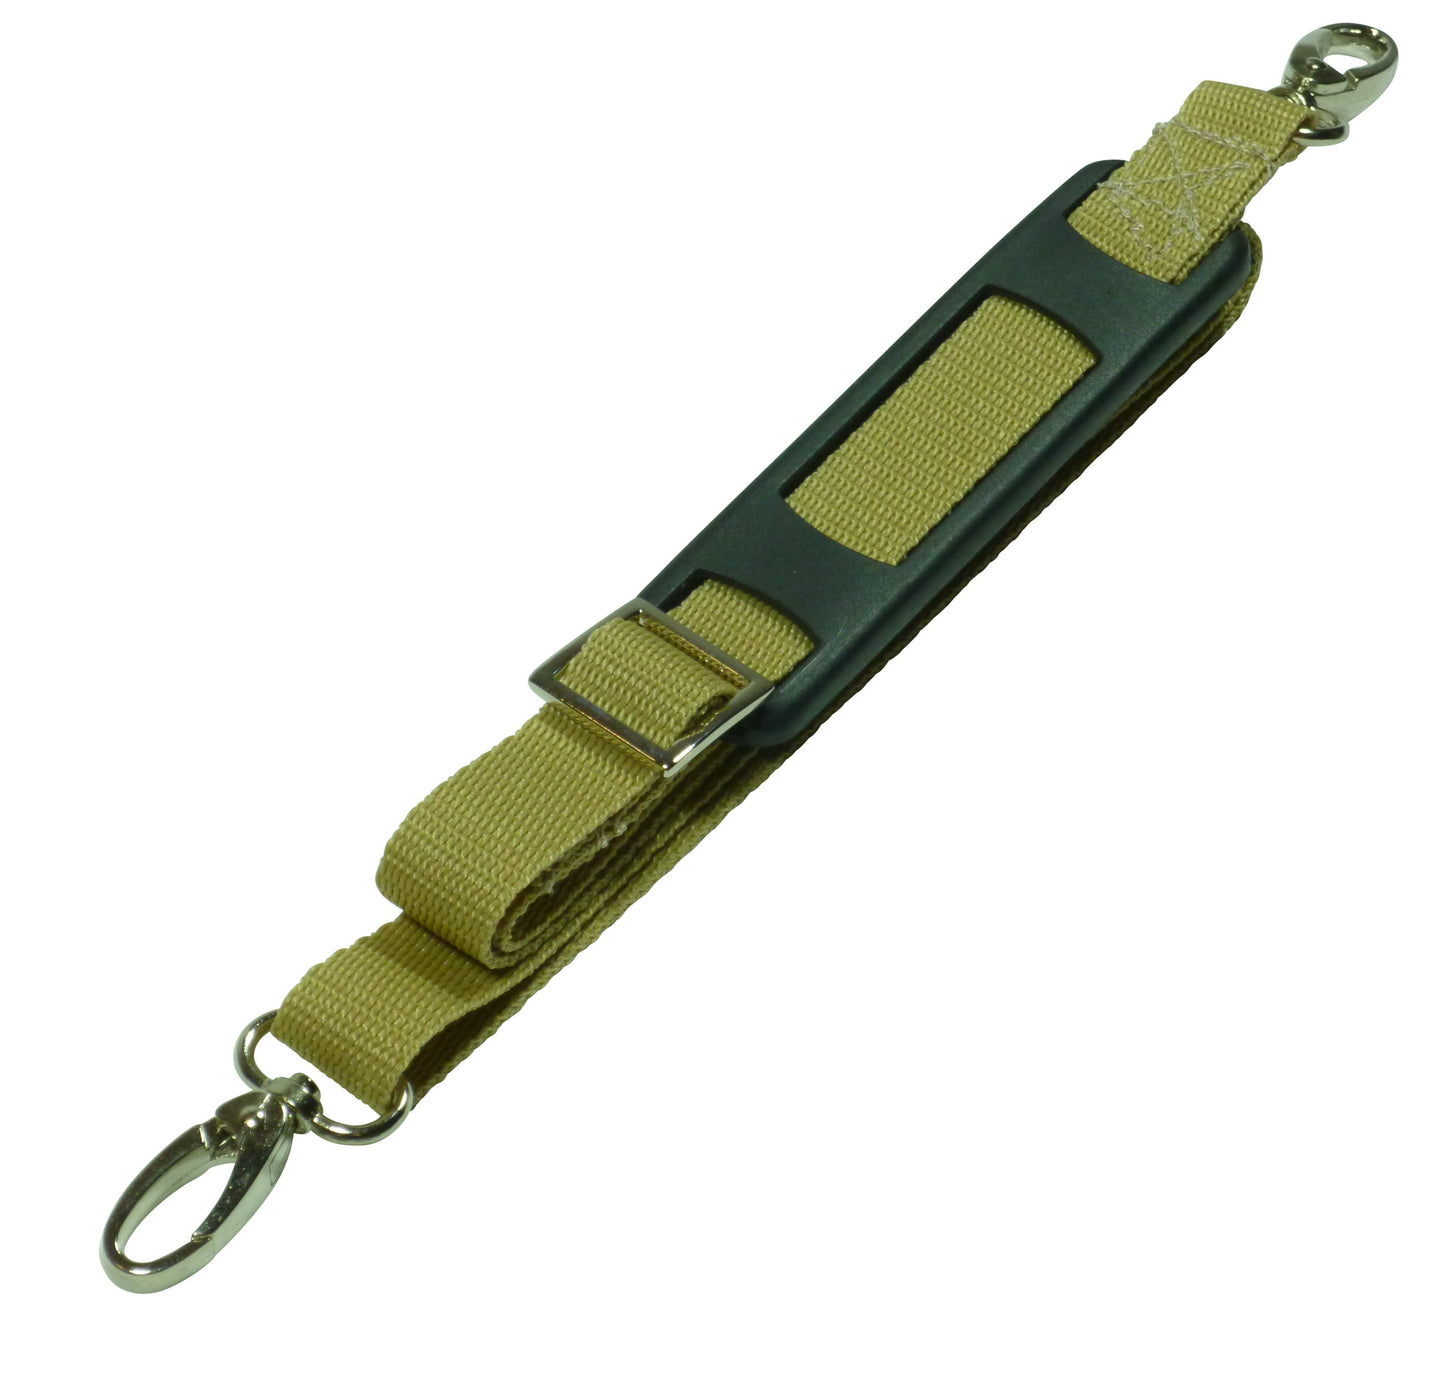 Benristraps 20mm Bag Strap with Metal Buckles and Shoulder Pad, 1 Metre in beige